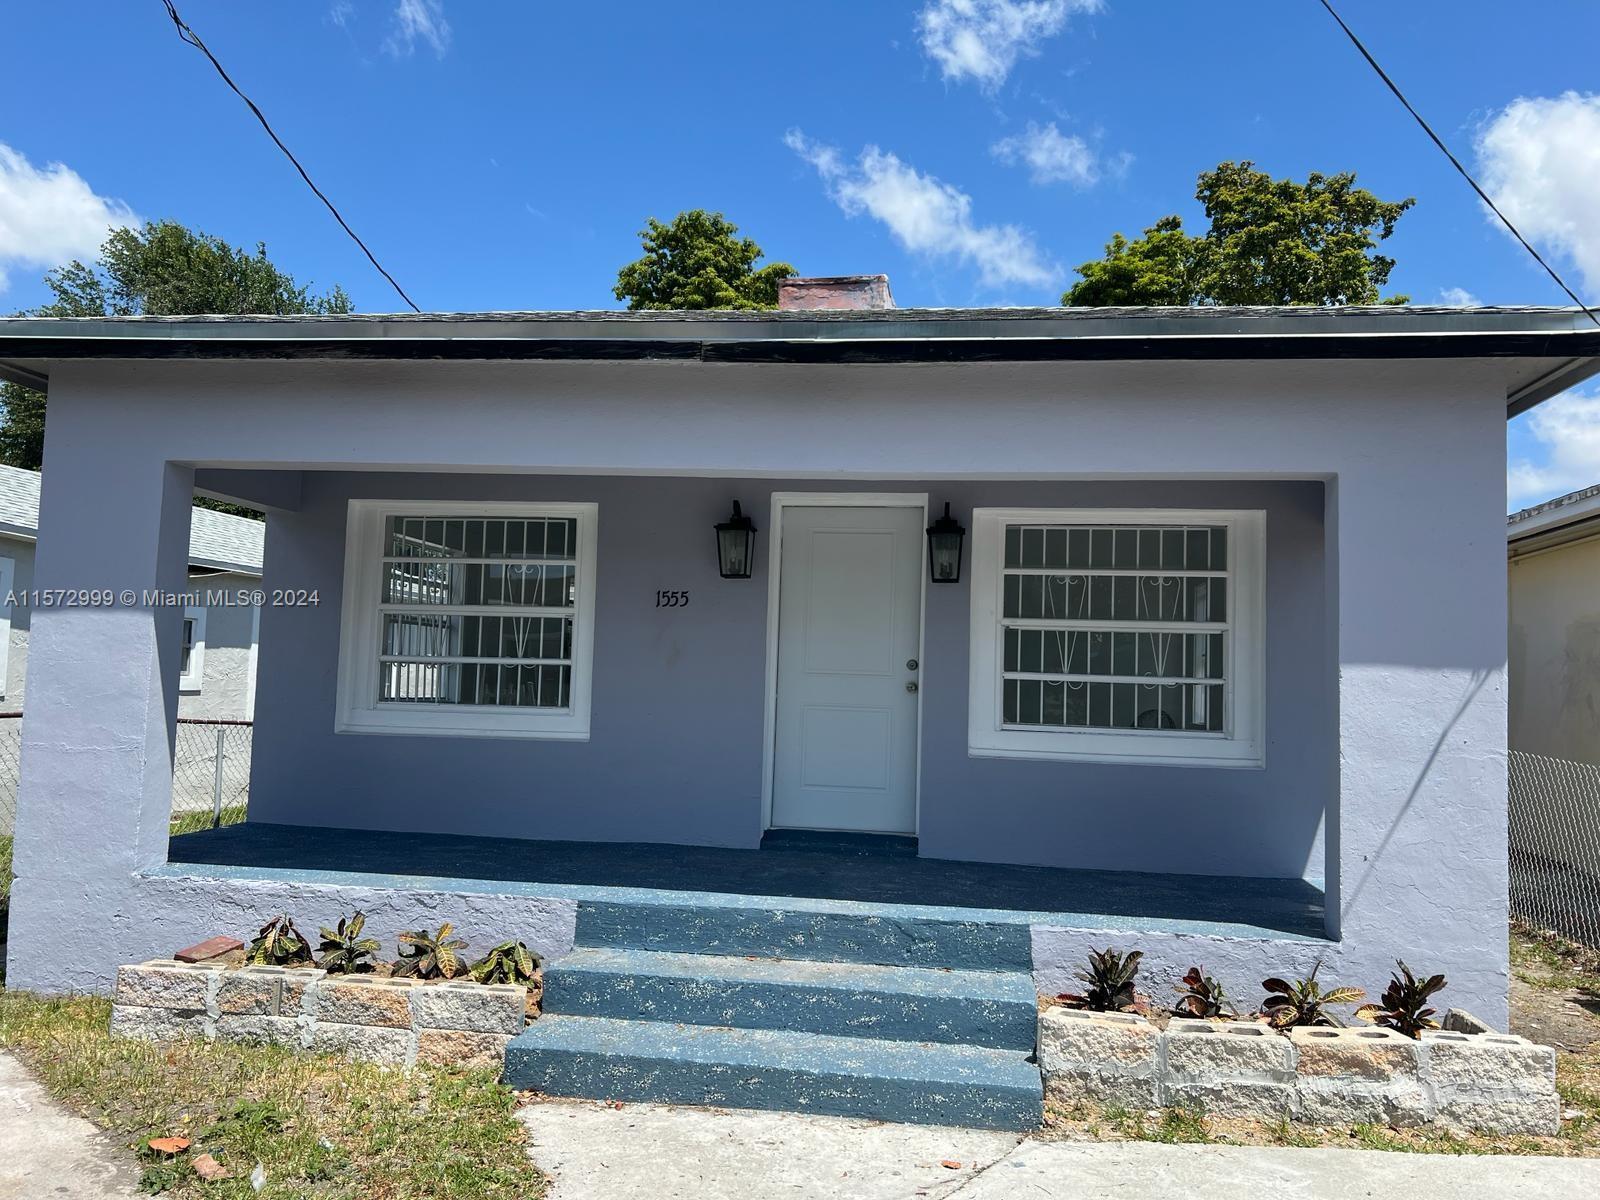 Photo of 1555 NW 70th St in Miami, FL